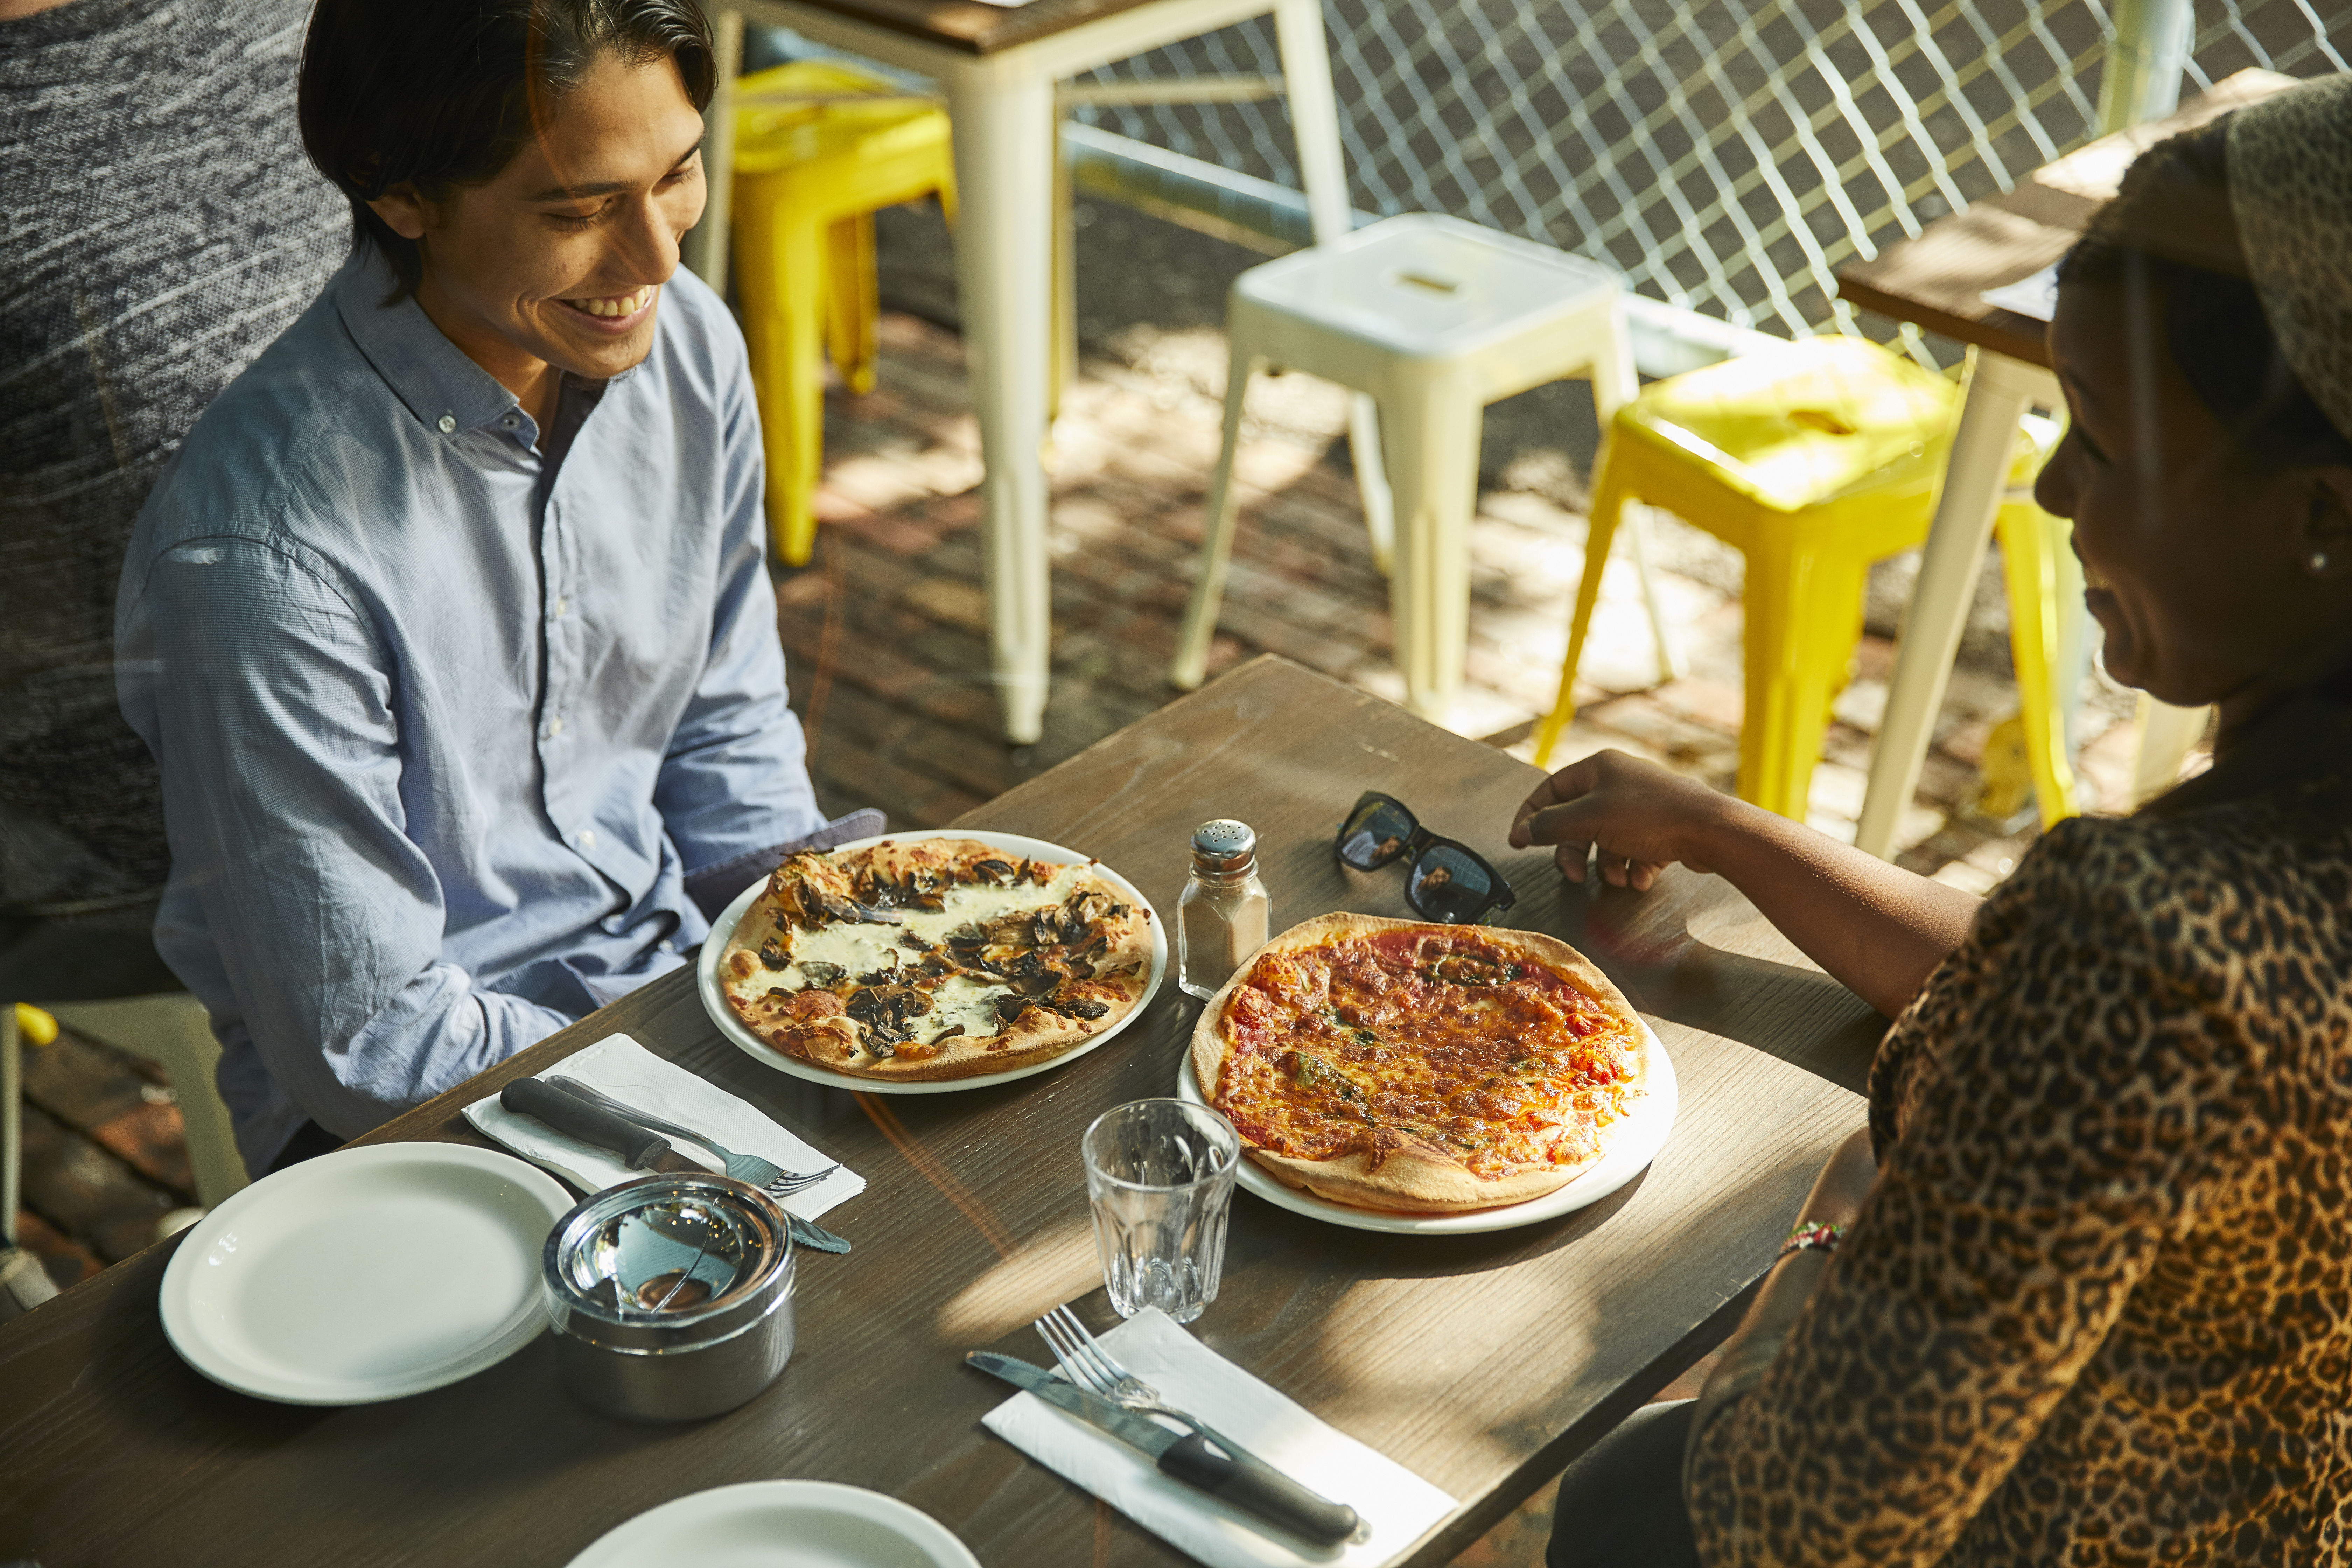 Two students eat pizza at an eatery in a Hawthorn laneway